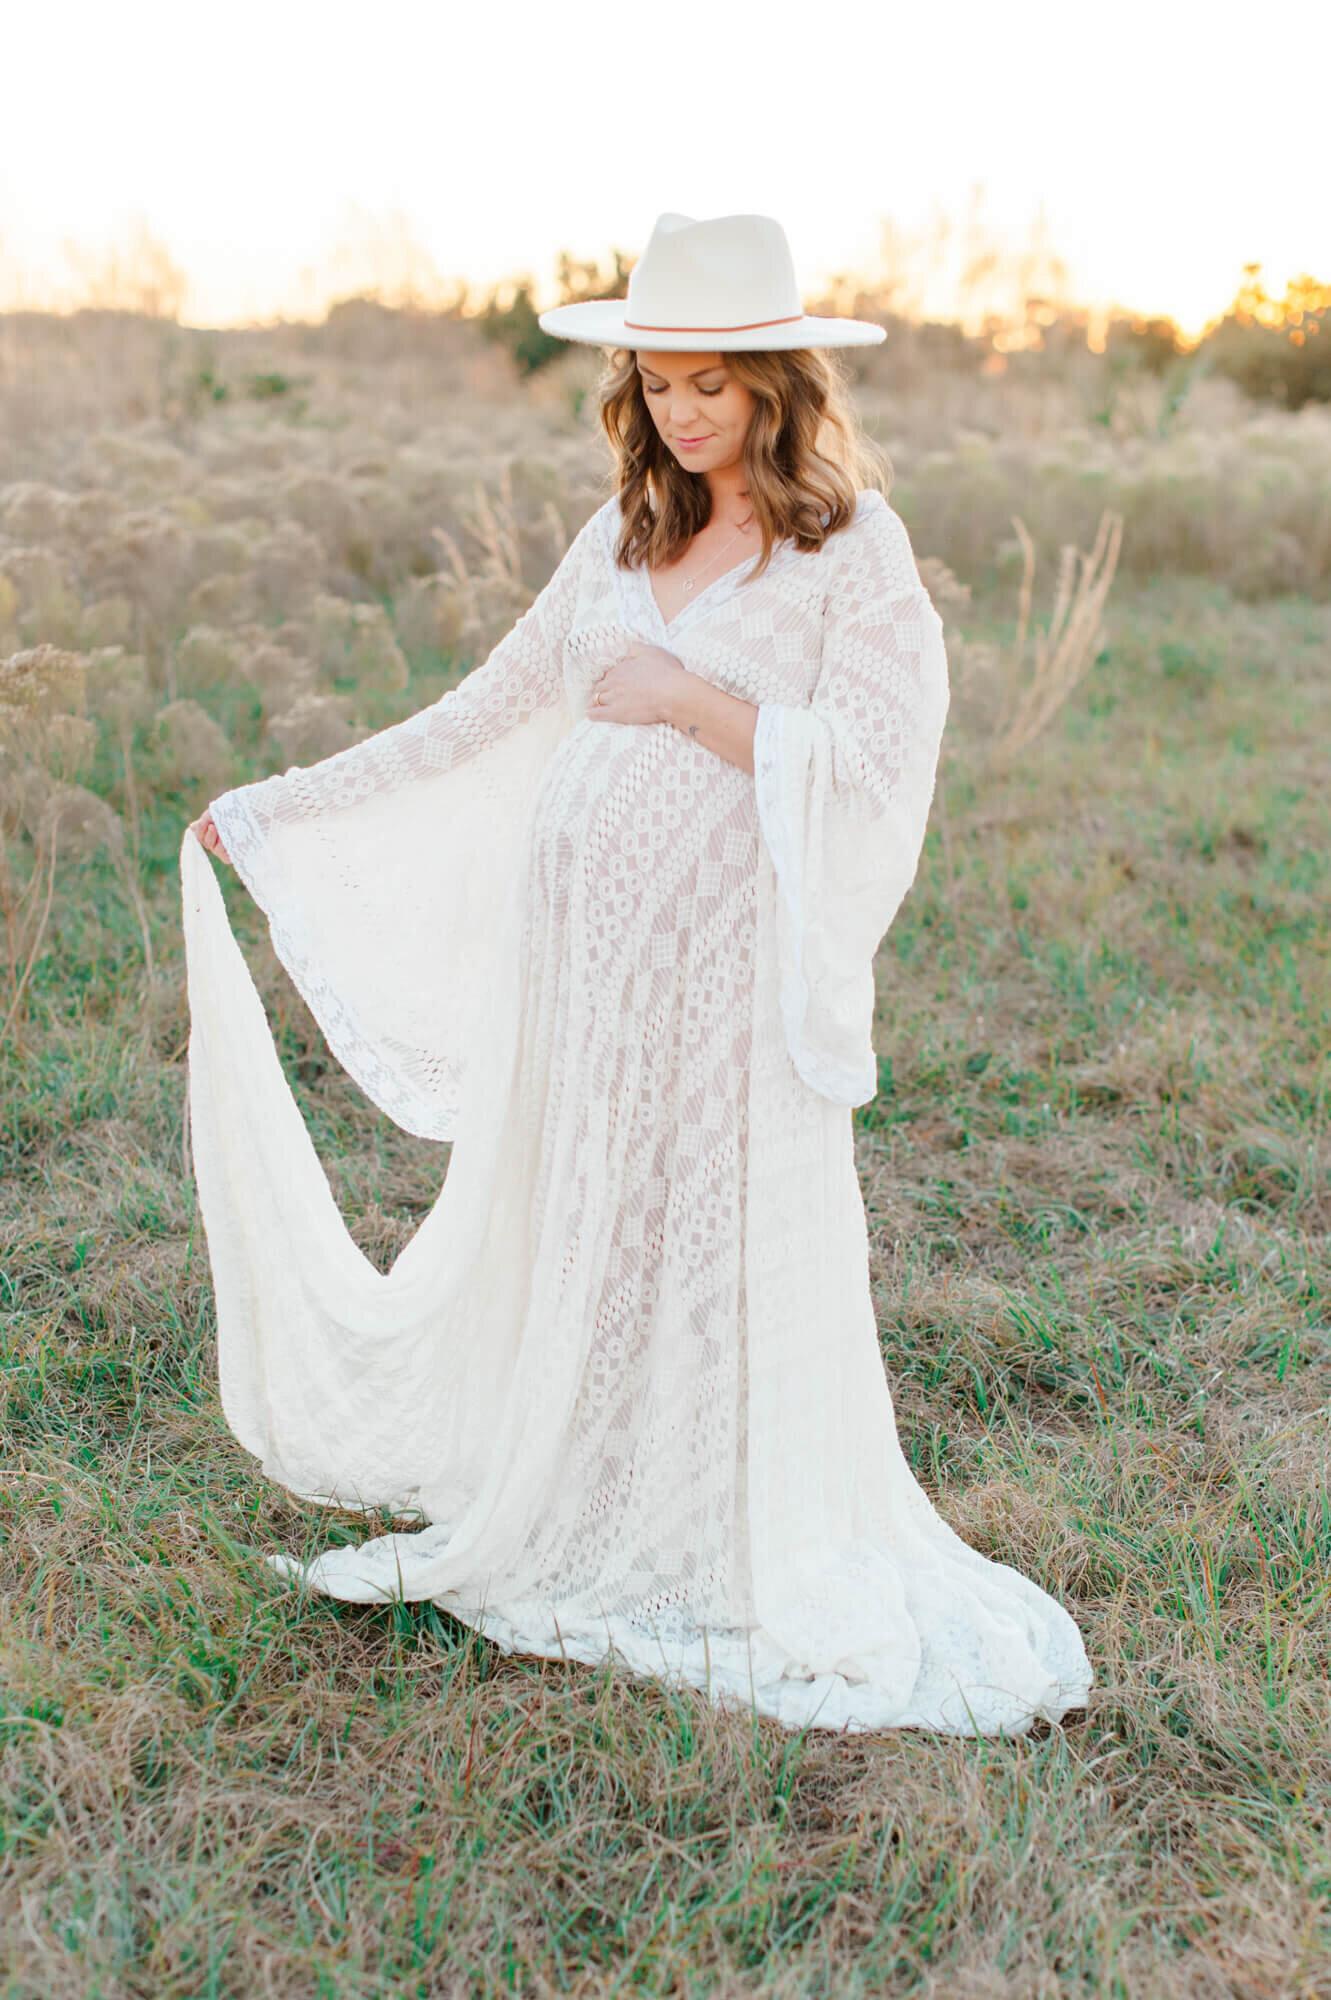 Pregnant mom holding her belly in a tall grass field while wearing a white lace gown